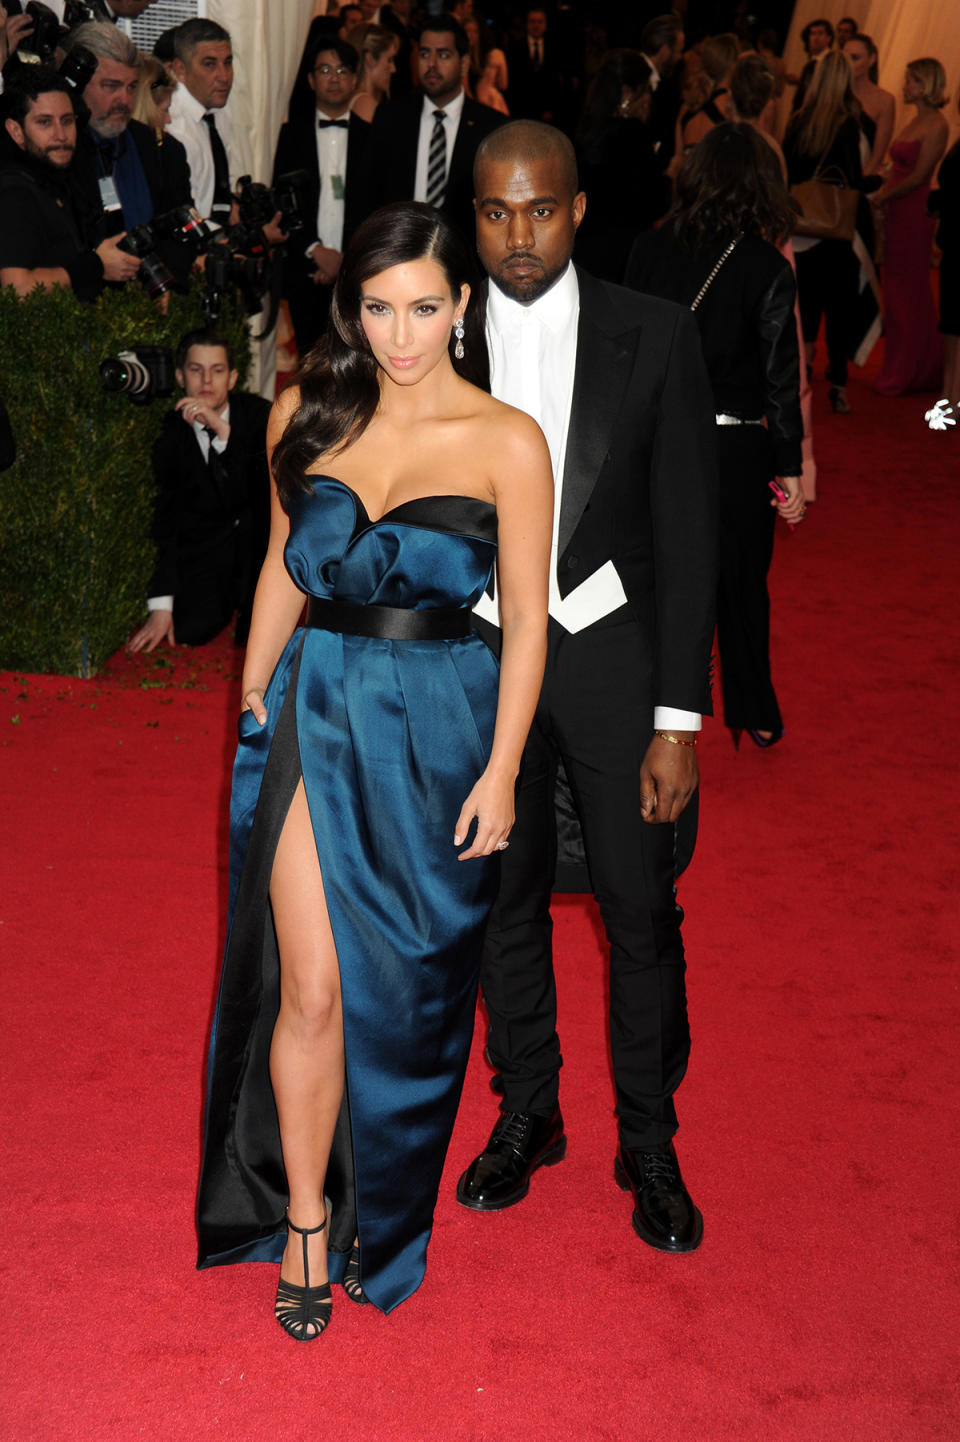 Kim Kardashian and Kanye West arriving at the Met Gala event at the Metropolitan Museum of Art in New York, USA.   (Photo by Dennis Van Tine/PA Images via Getty Images)